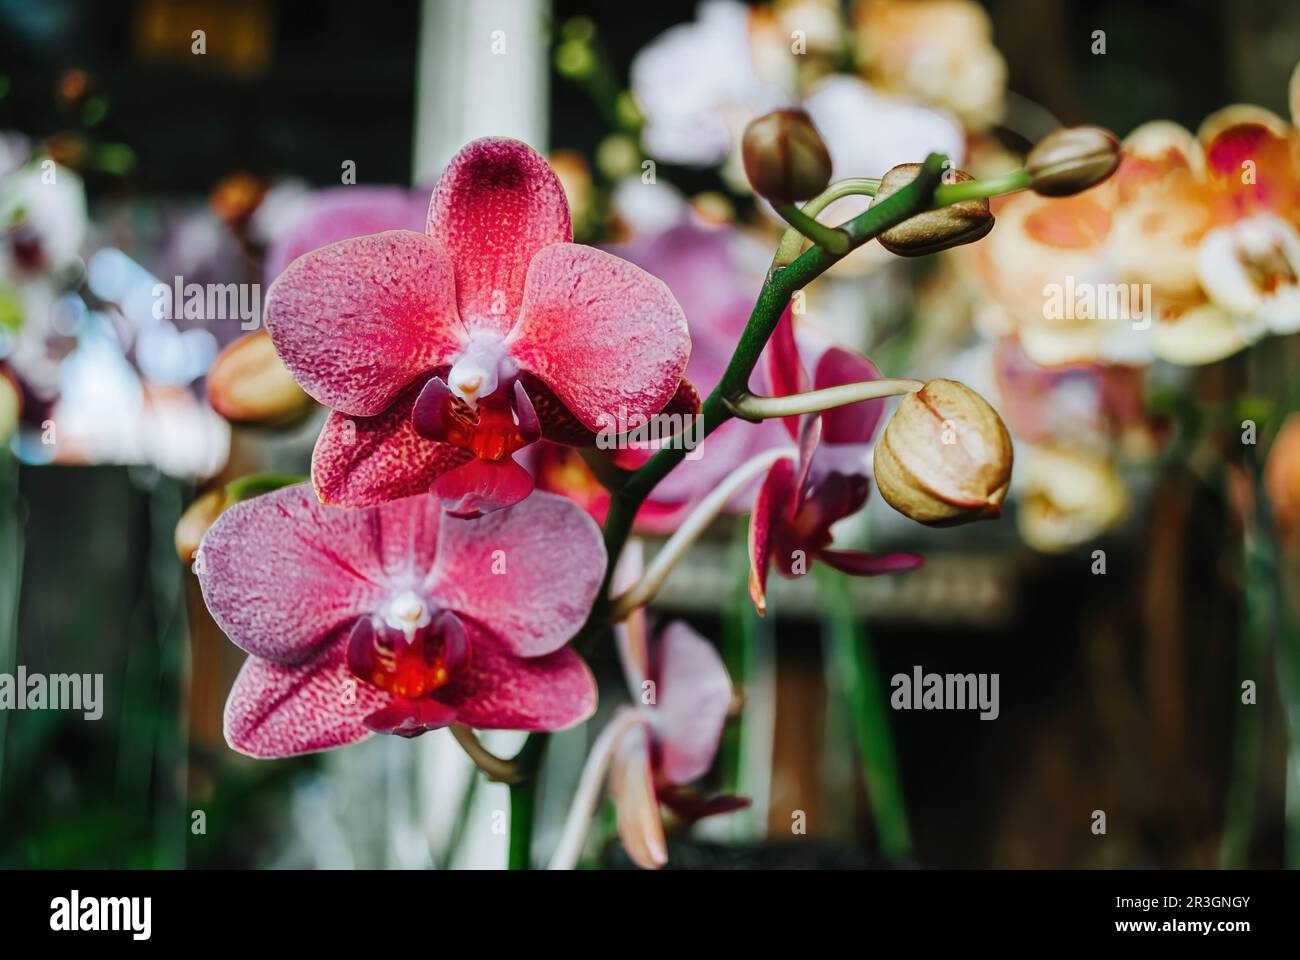 A Doritaenopsis or Purple Moon Orchid flower with bokeh or blurred background. Soft focus or unfocused. Stock Photo